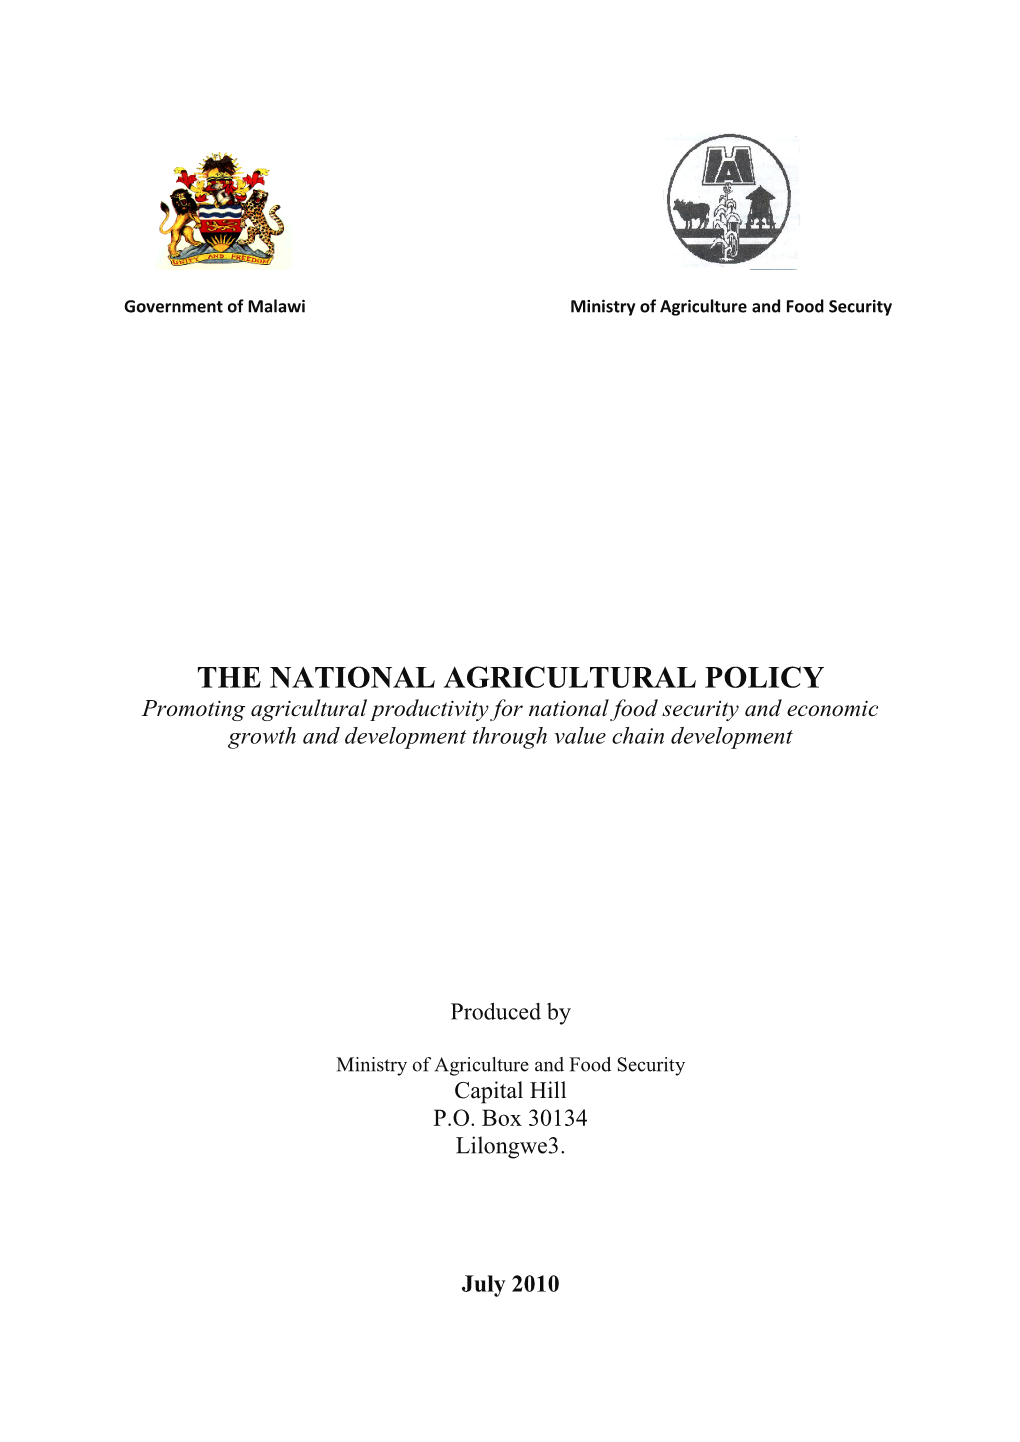 THE NATIONAL AGRICULTURAL POLICY Promoting Agricultural Productivity for National Food Security and Economic Growth and Development Through Value Chain Development